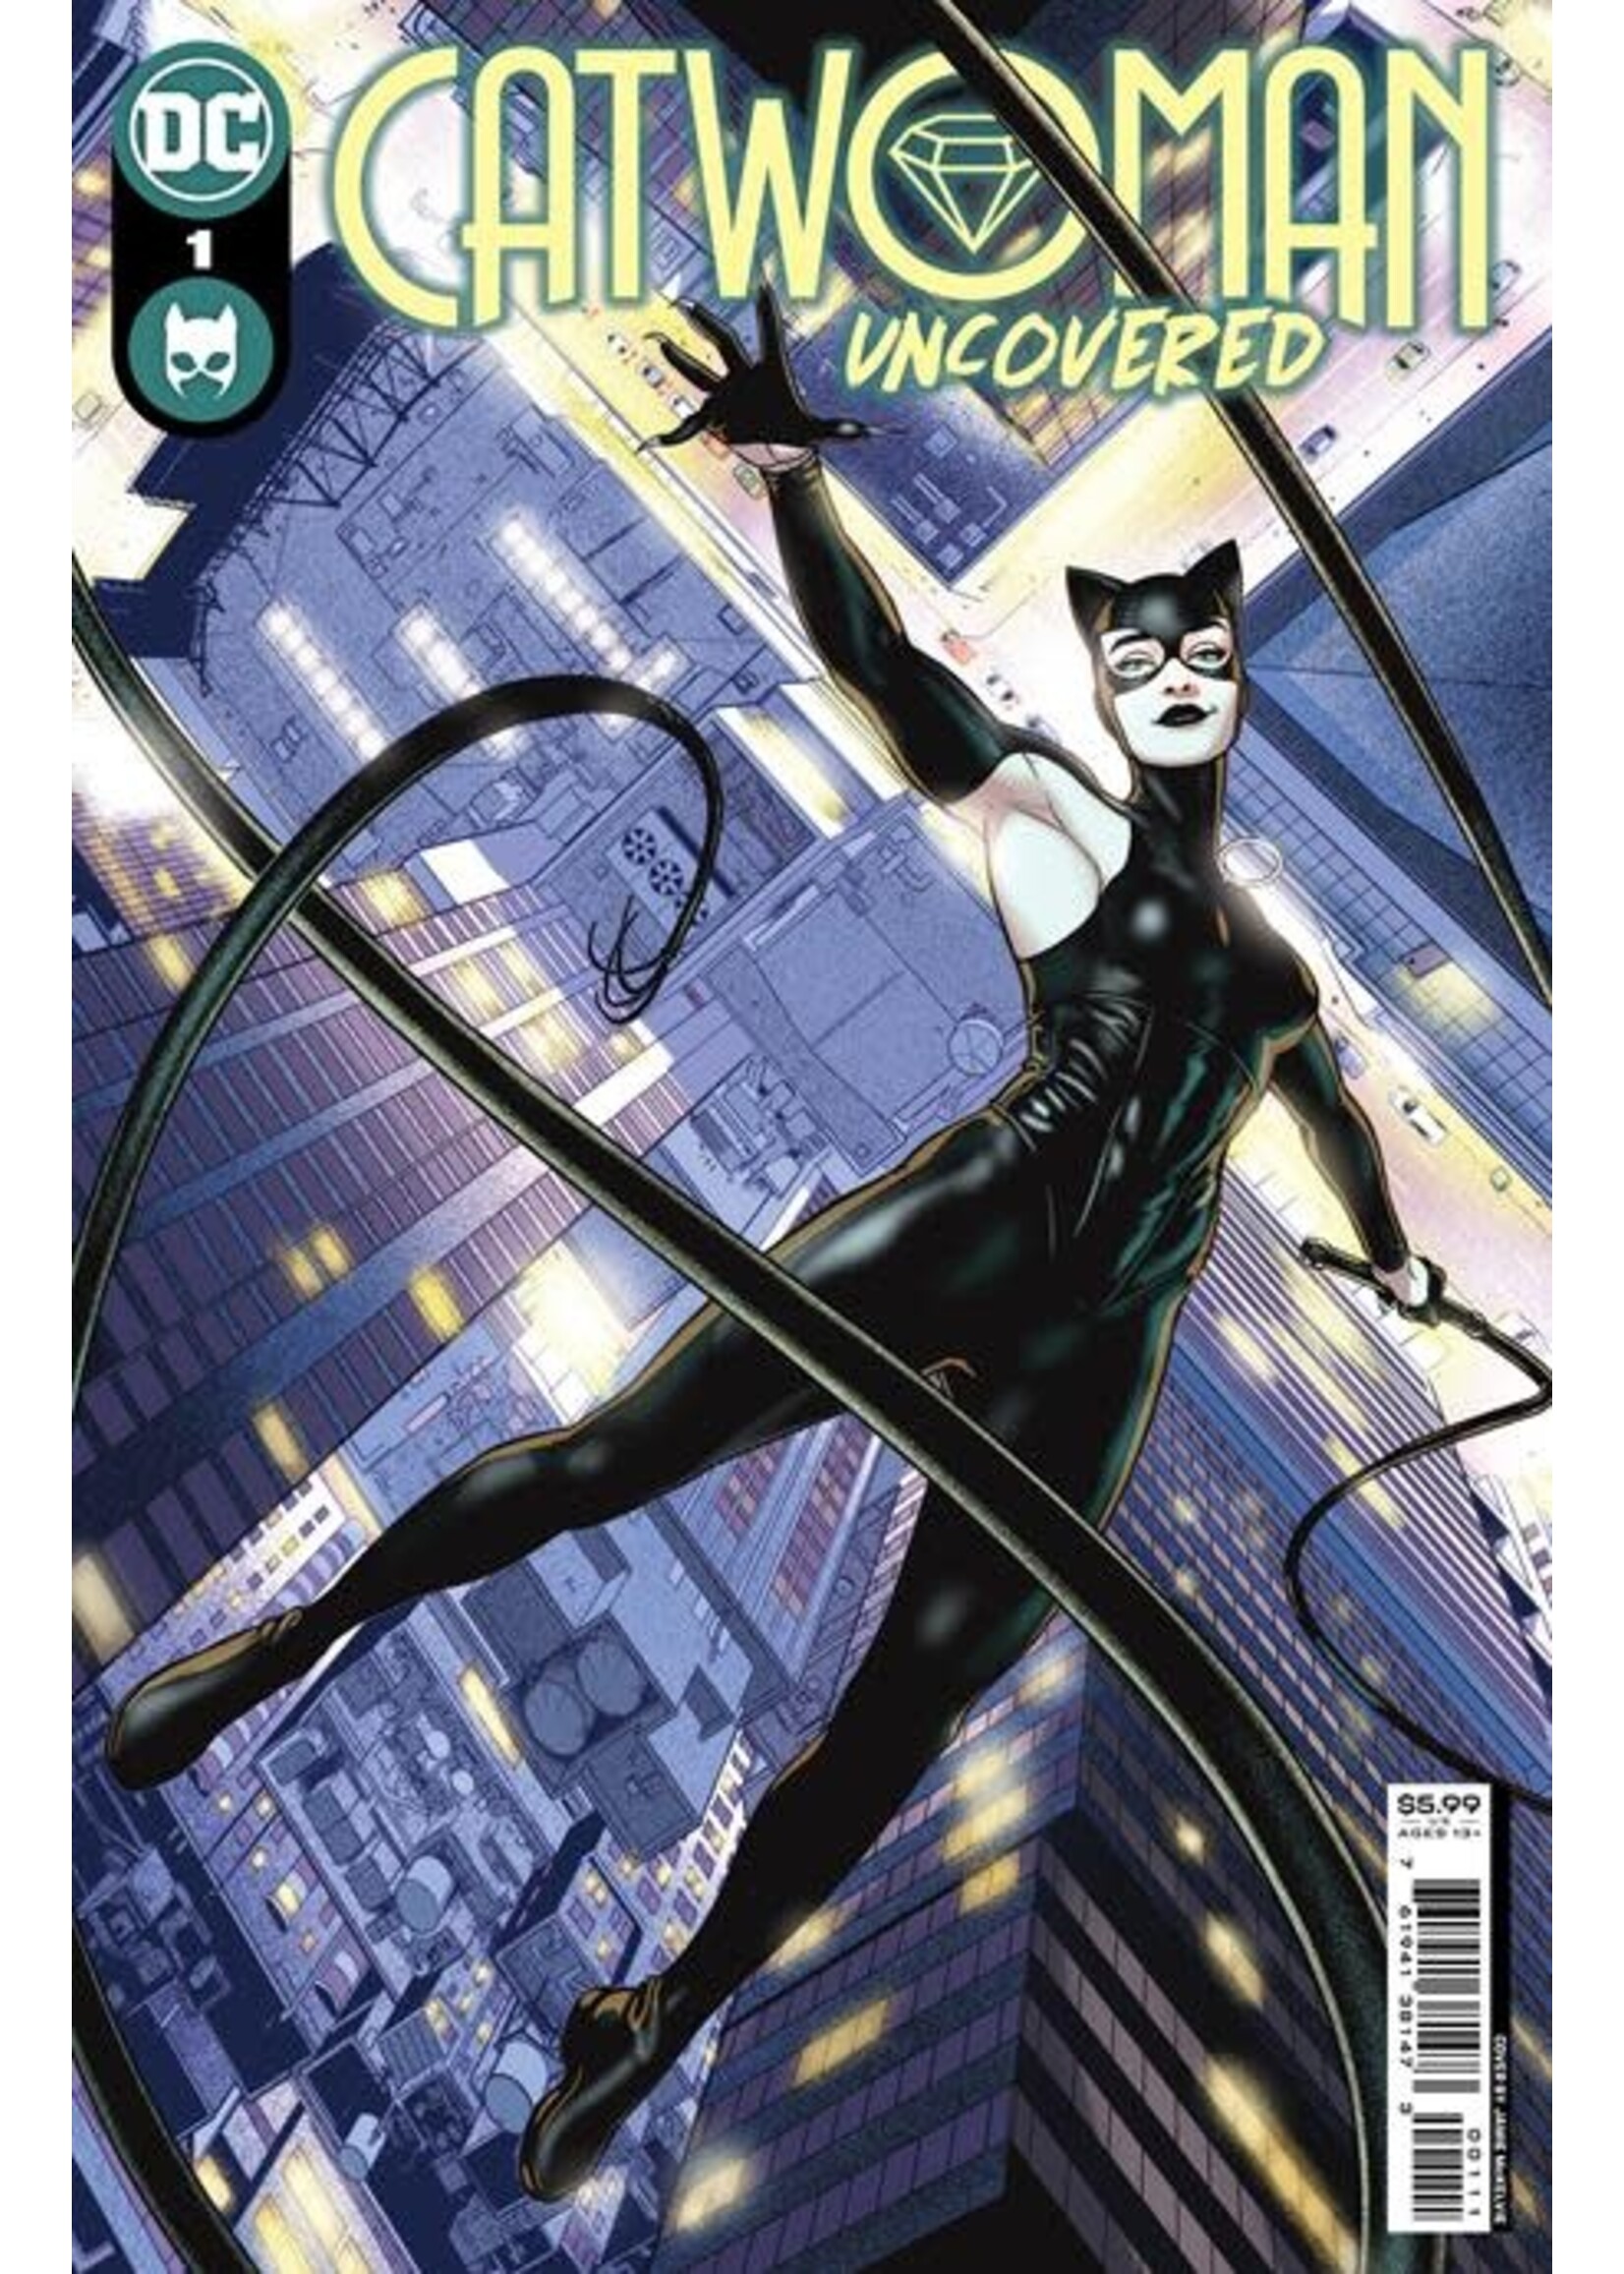 DC COMICS CATWOMAN UNCOVERED #1